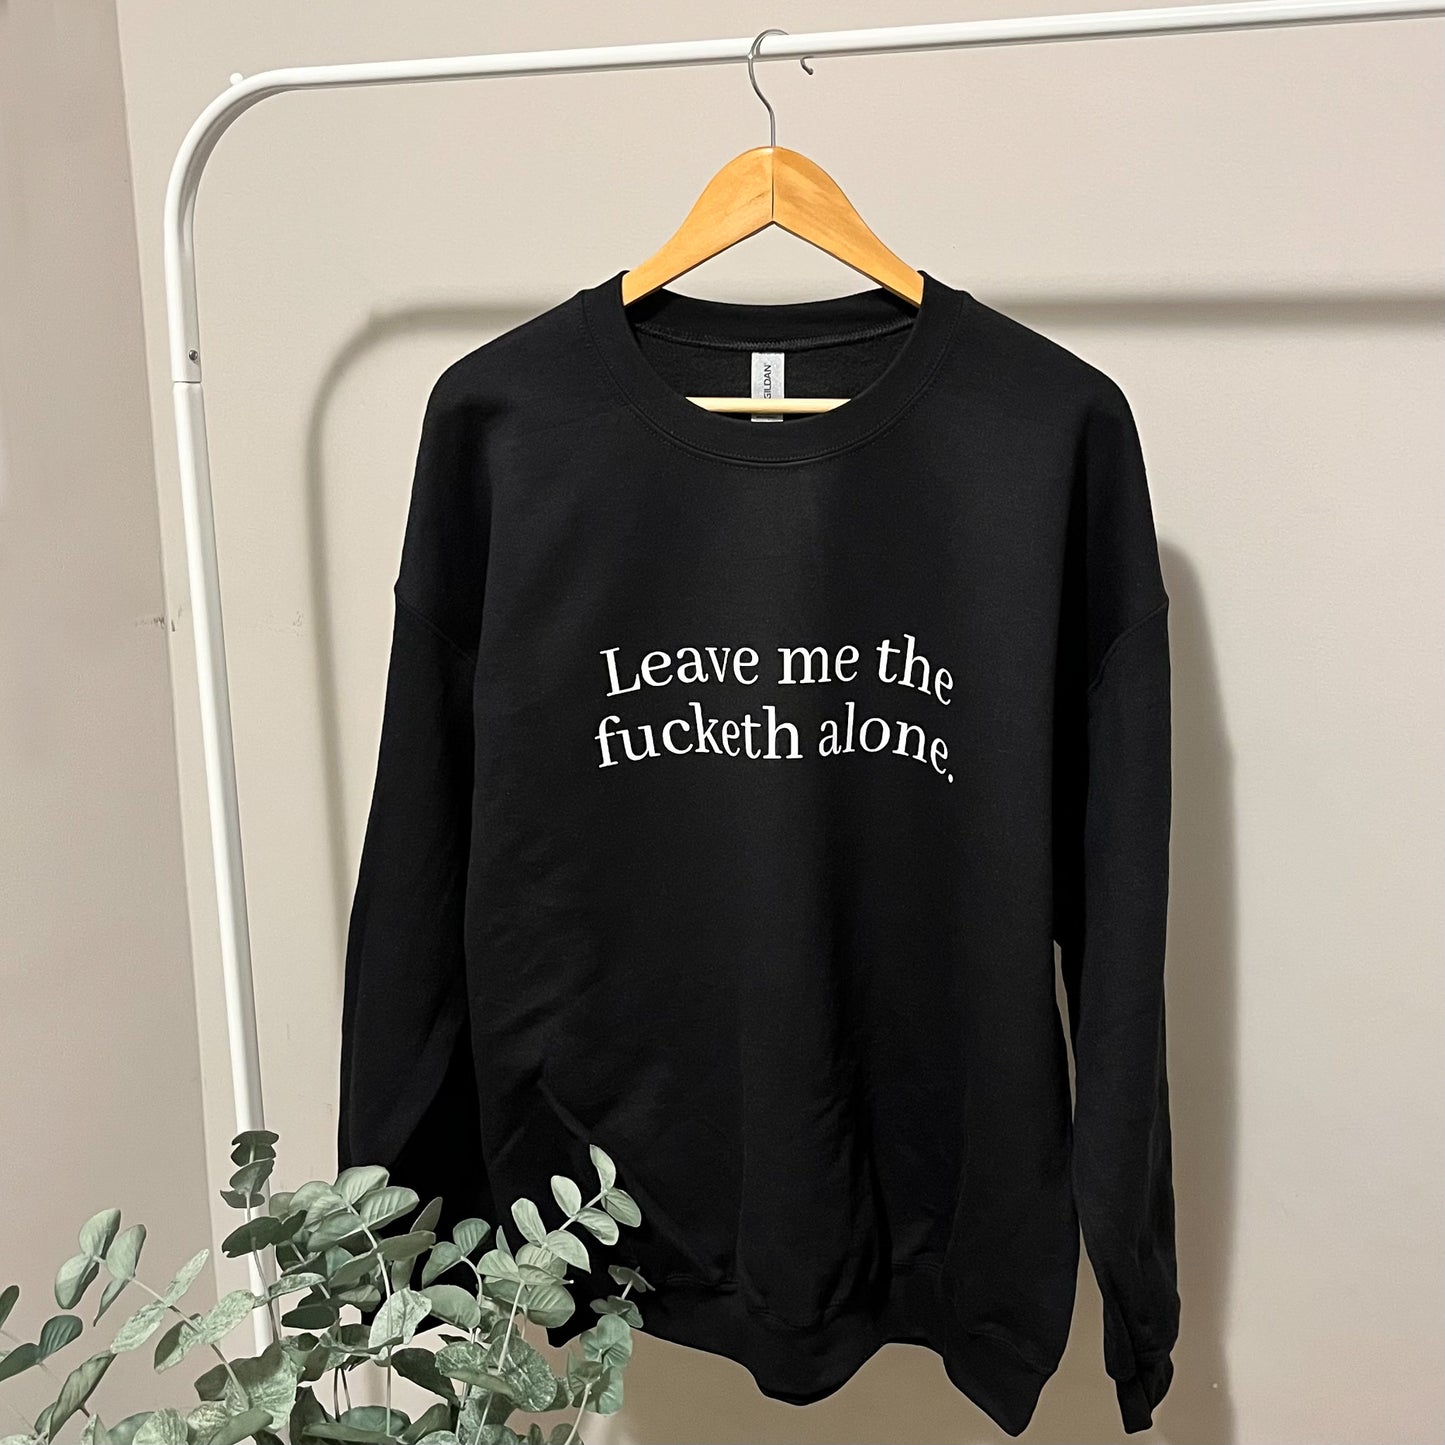 A black crewneck sweatshirt is hanging on a wooden hanger from a white garment rack. There is a eucalyptus plant on the bottom left hand corner, and the wall behind the shirt is beige. The black sweater has a funny saying on it in white writing: "Leave me the fucketh alone."